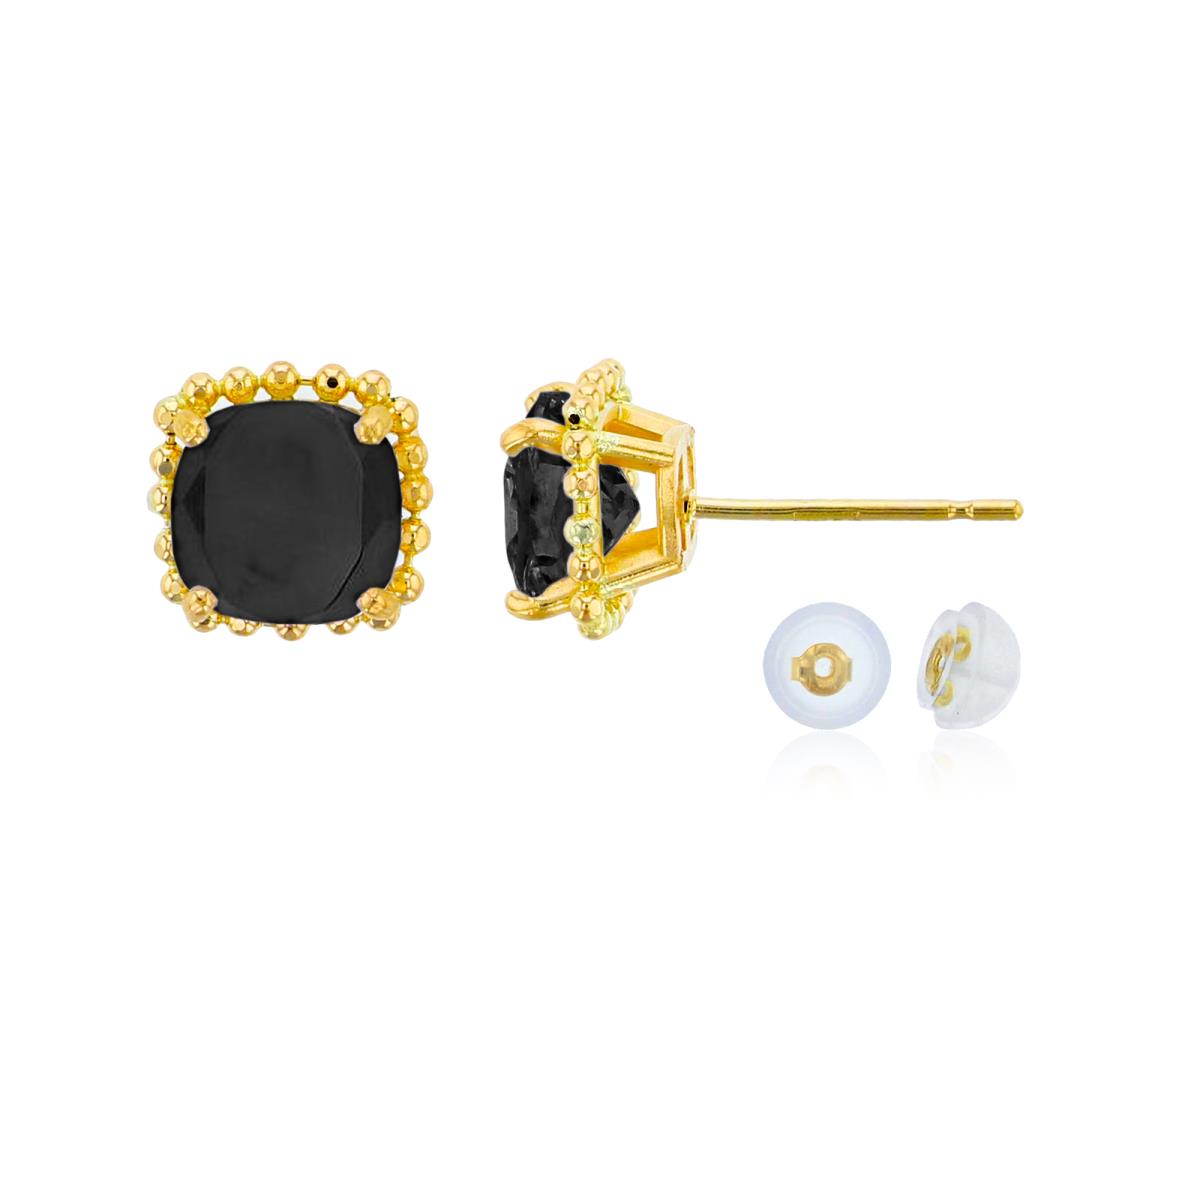 10K Yellow Gold 6x6mm Cushion Cut Onyx Bead Frame Stud Earring with Silicone Back